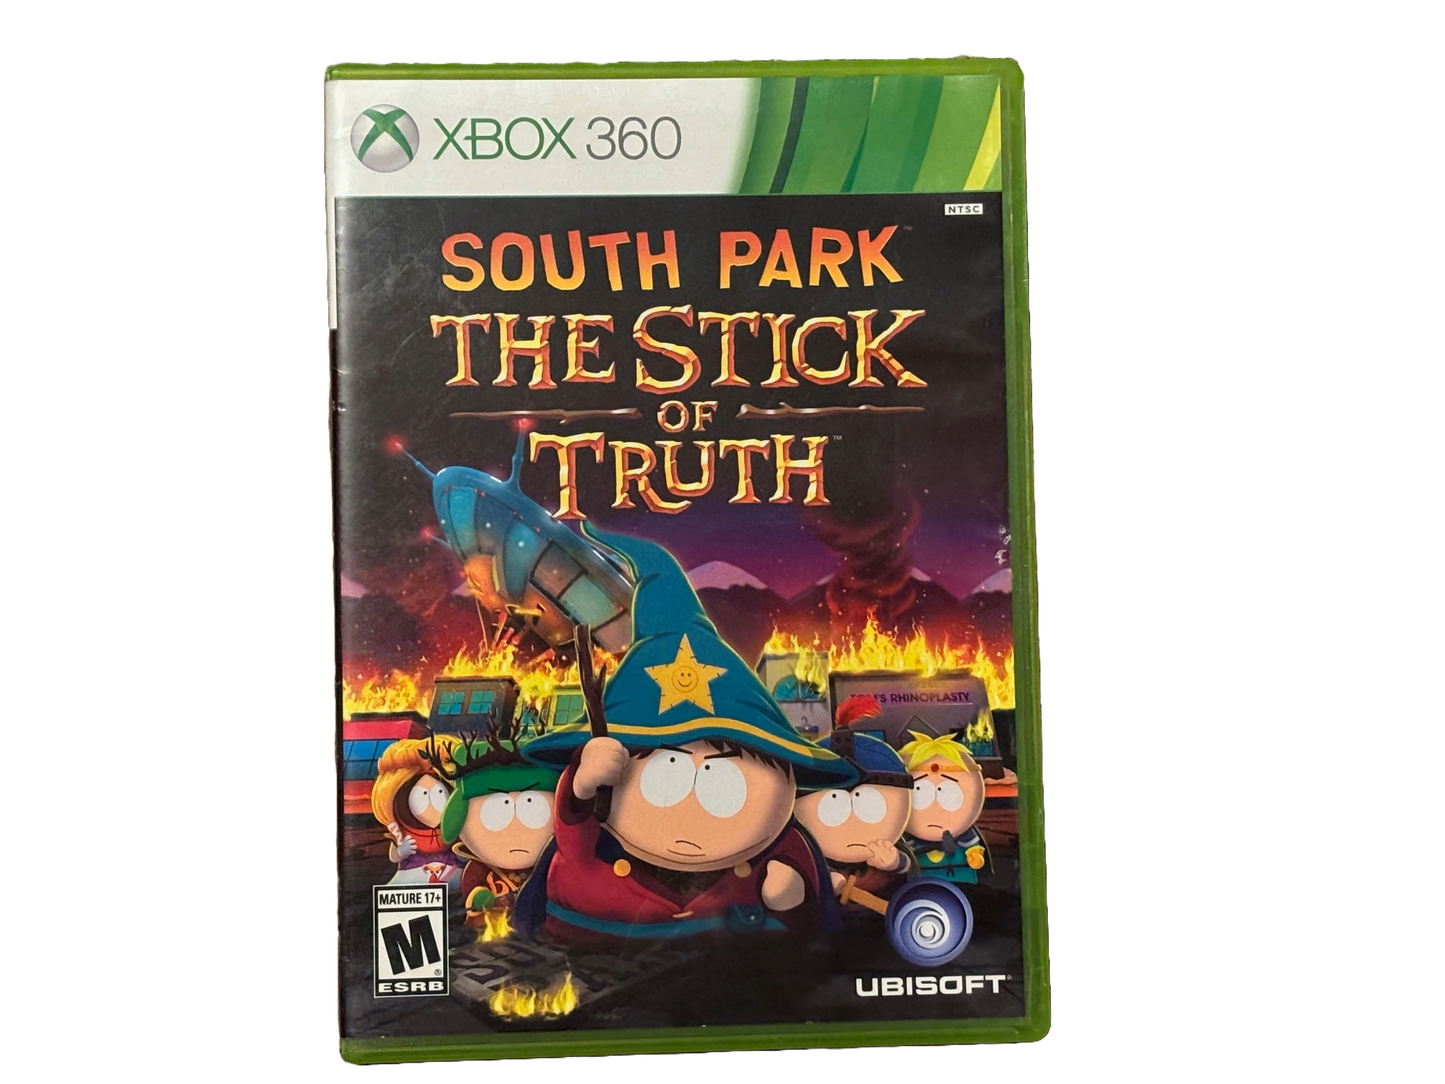 South Park The Stick of Truth Microsoft Xbox 360 Video Game